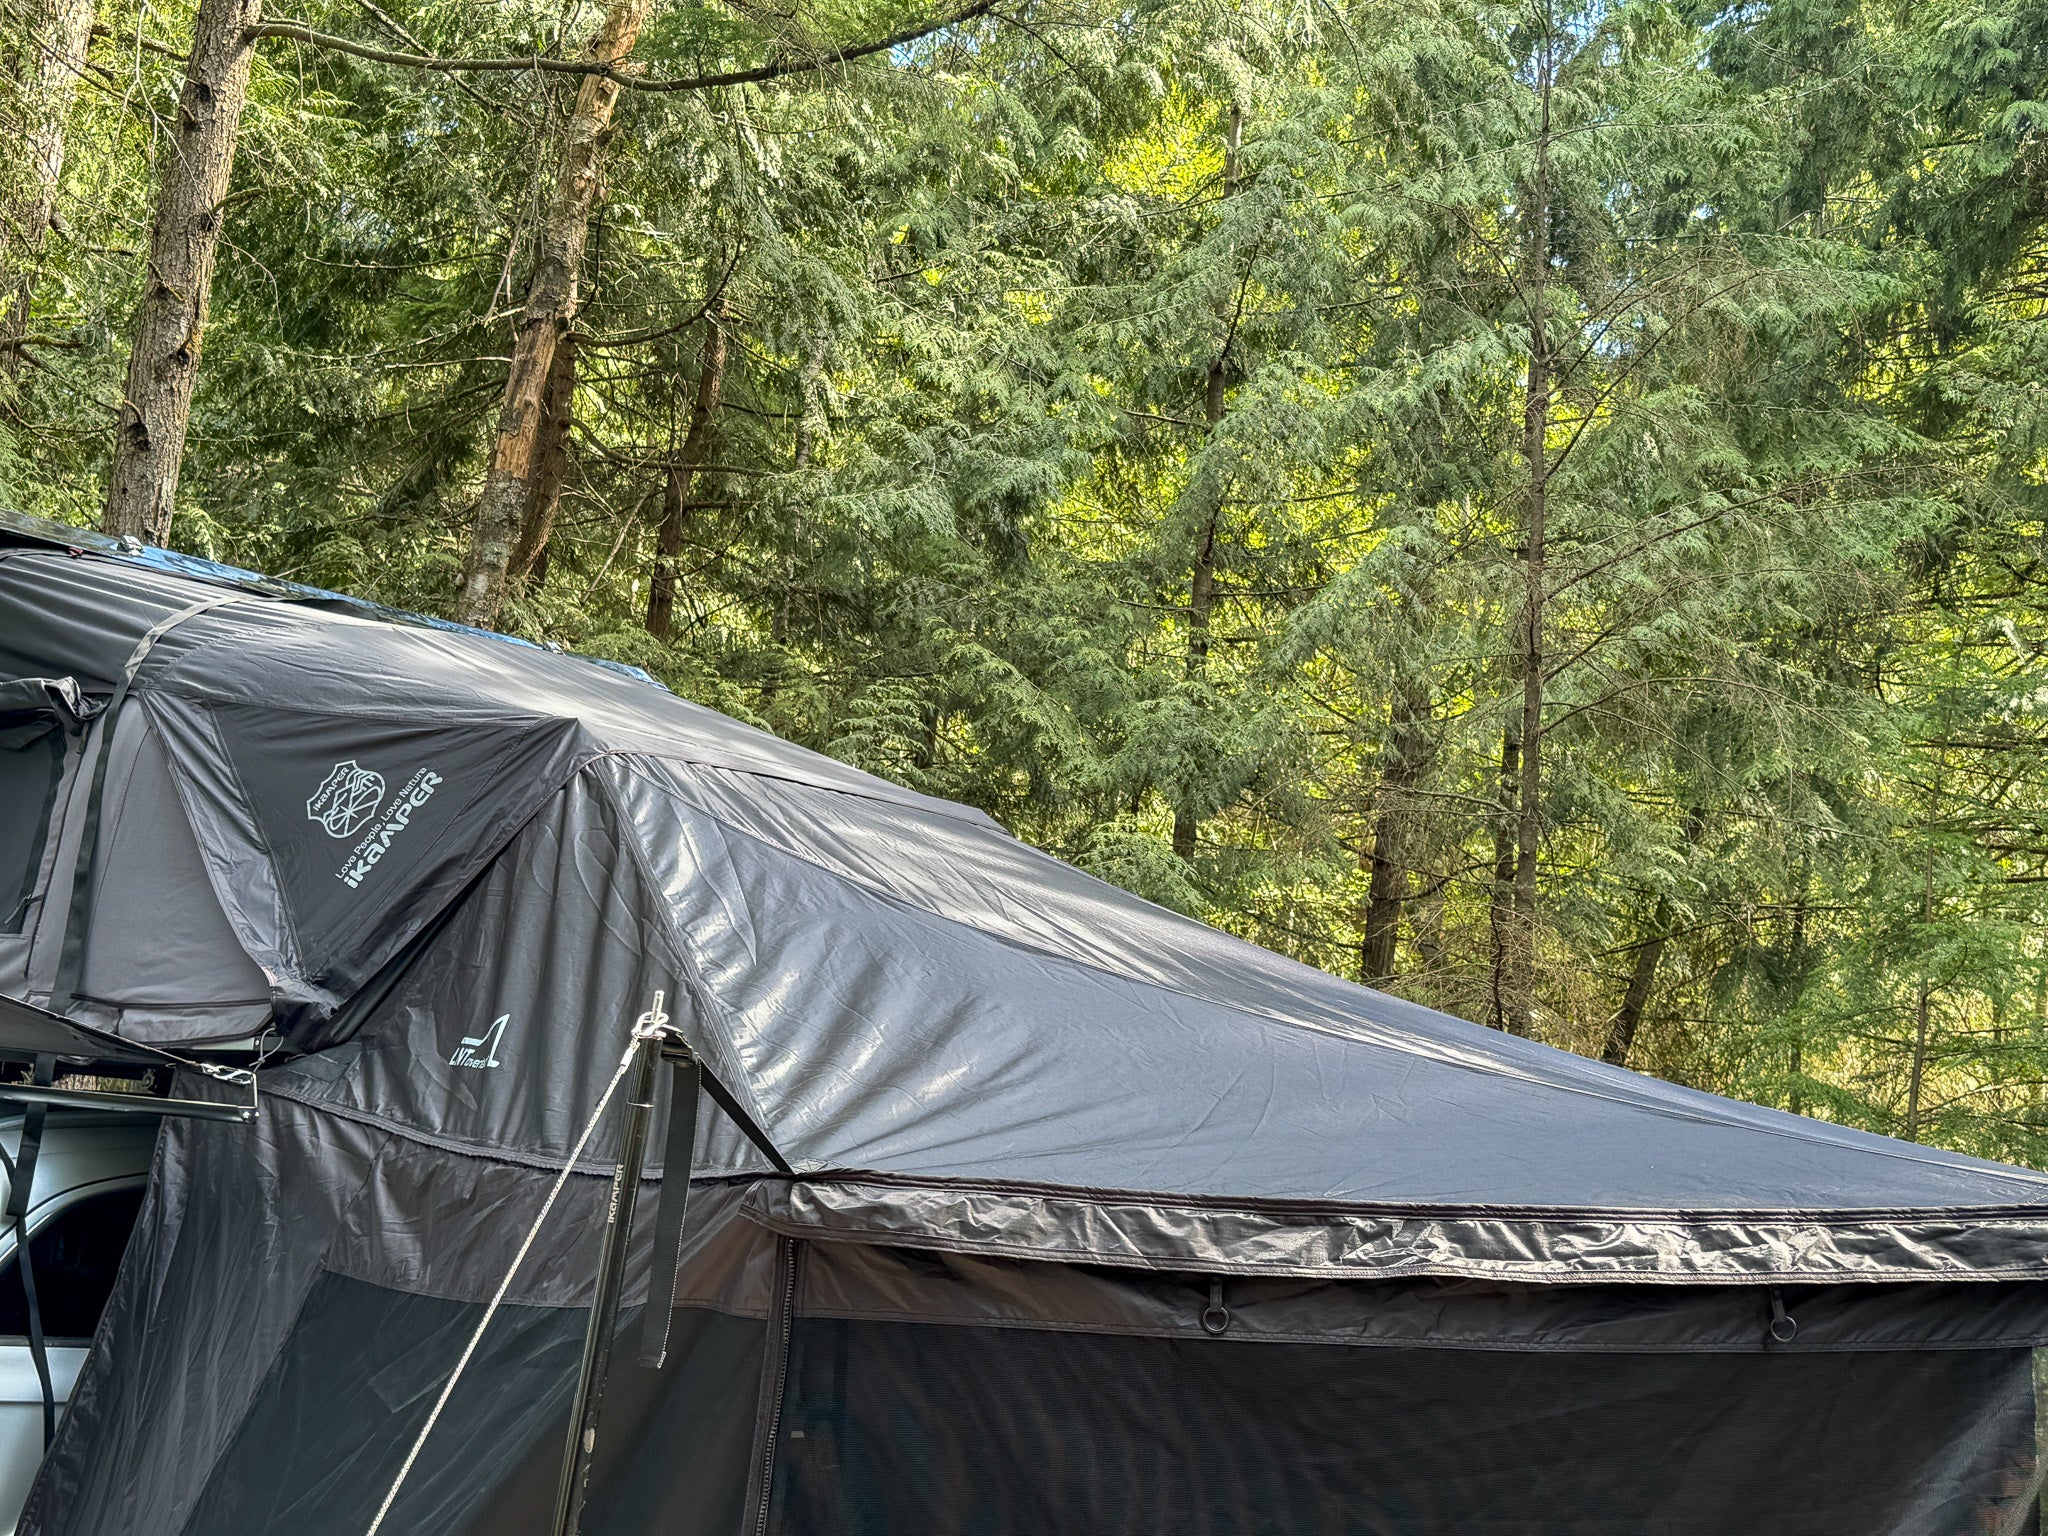 LNT Overland Skycamp Awning Mesh Screen is made of material for the UV Block. It gives the powerful shade for your area.